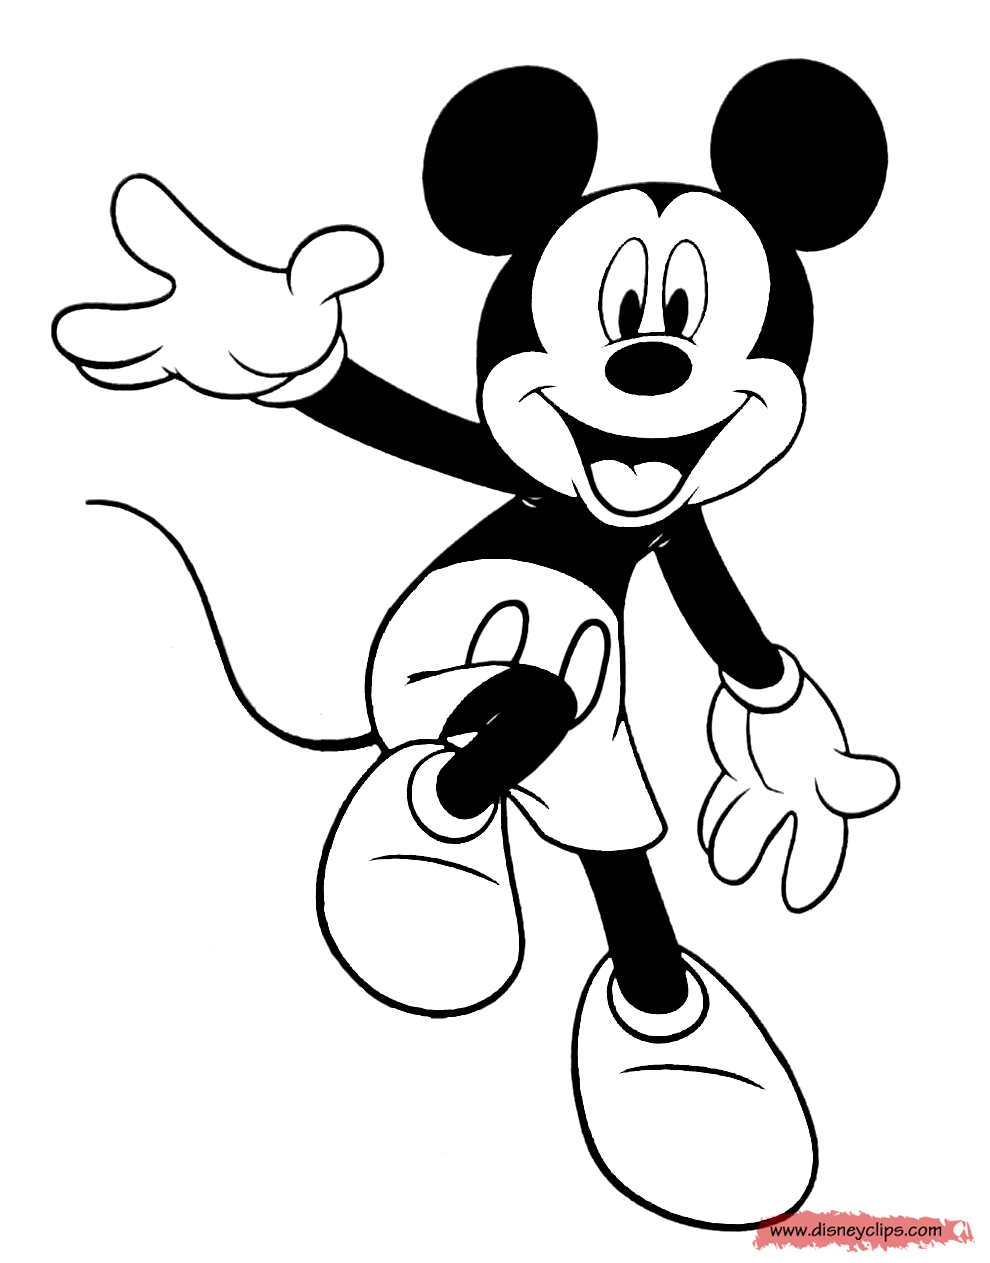 Mickey Mouse Coloring Pages 10 | Disney's World of Wonders